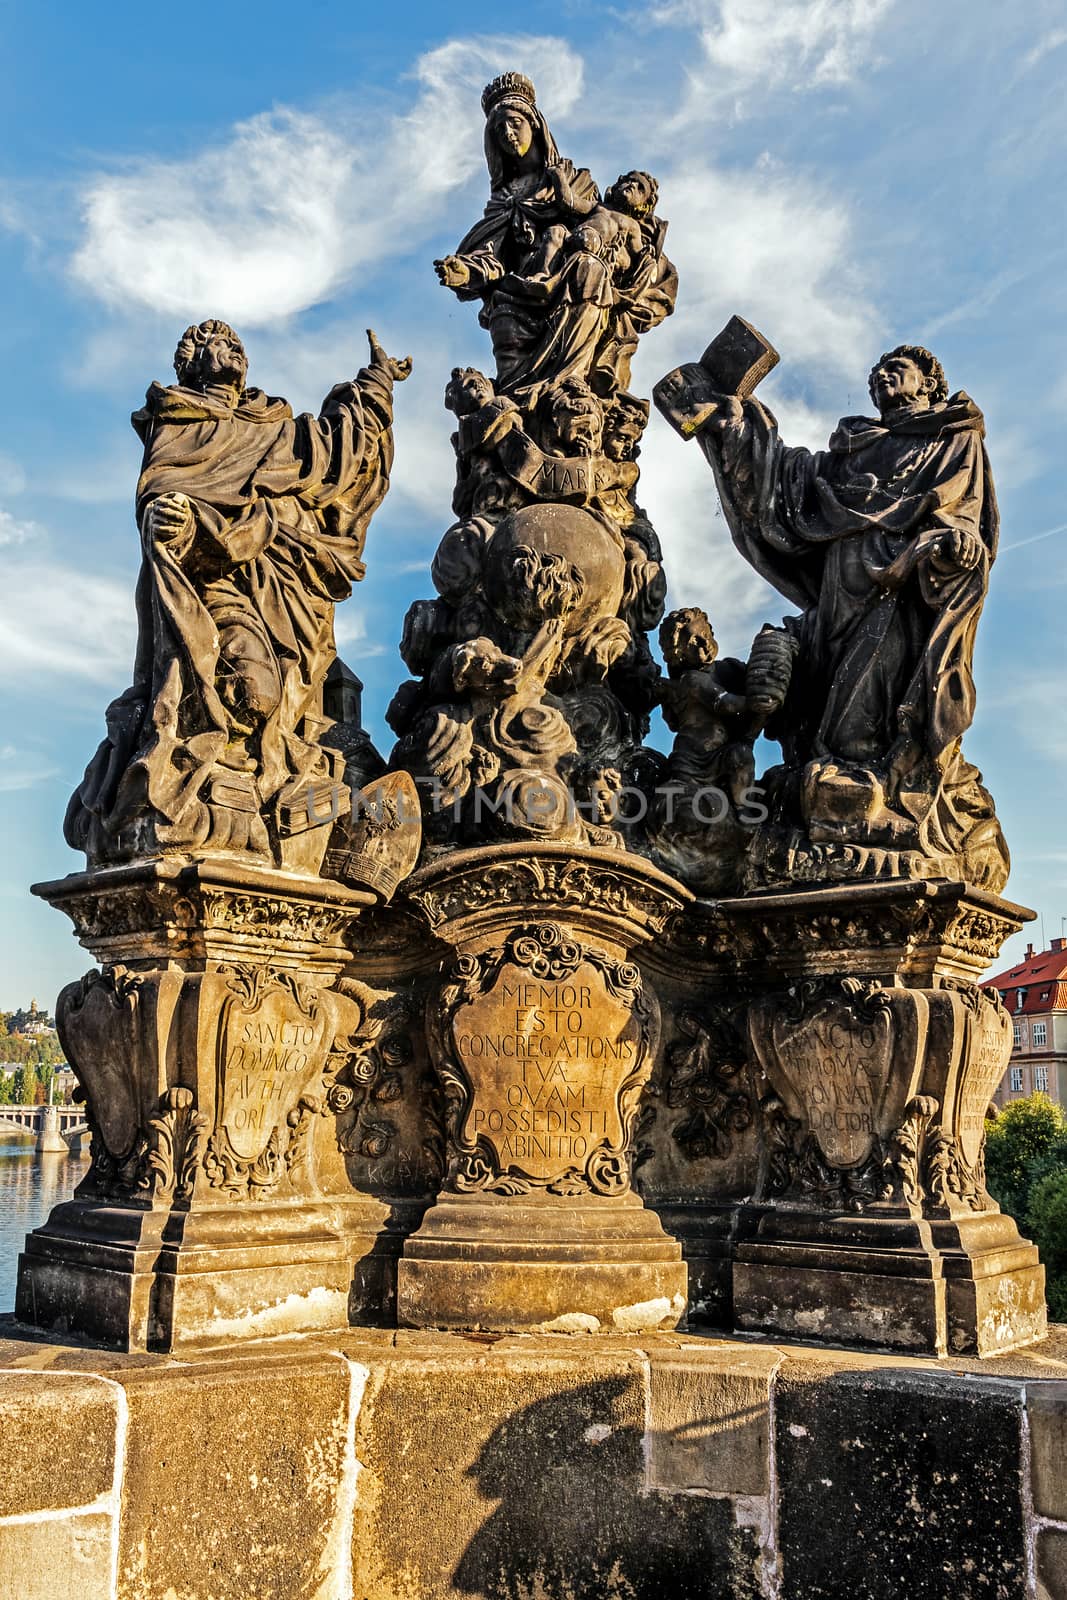 Sculpture of Virgin Mary surrounded by the Saints on the Charles Bridge in Prague, the capital of the Czech Republic on the Vltava River, home to many cultural attractions.